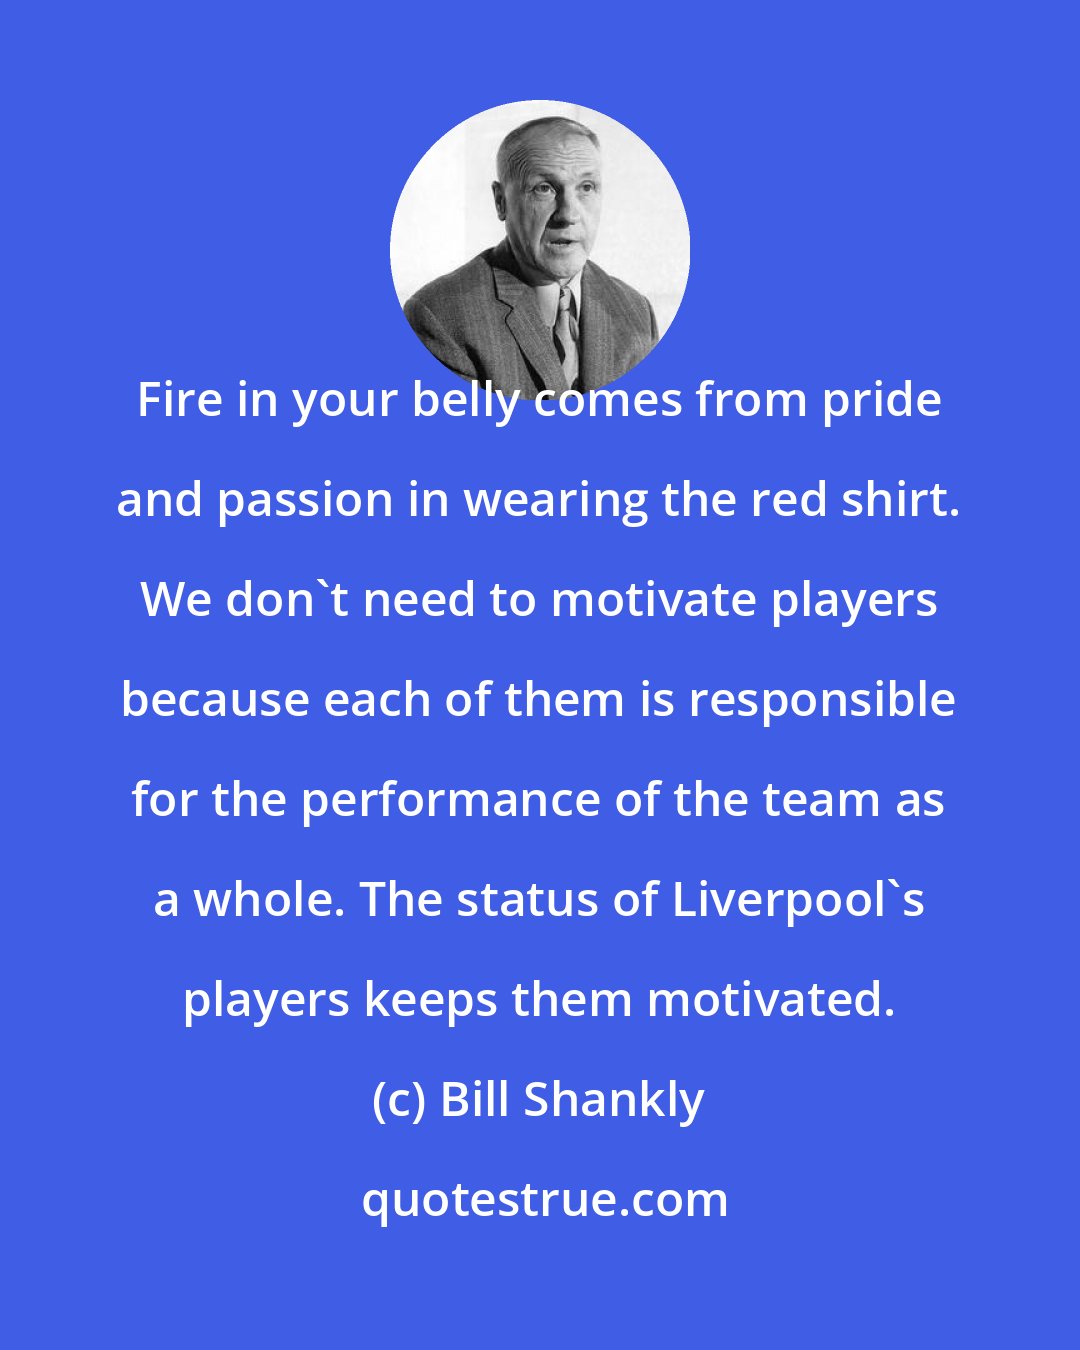 Bill Shankly: Fire in your belly comes from pride and passion in wearing the red shirt. We don't need to motivate players because each of them is responsible for the performance of the team as a whole. The status of Liverpool's players keeps them motivated.